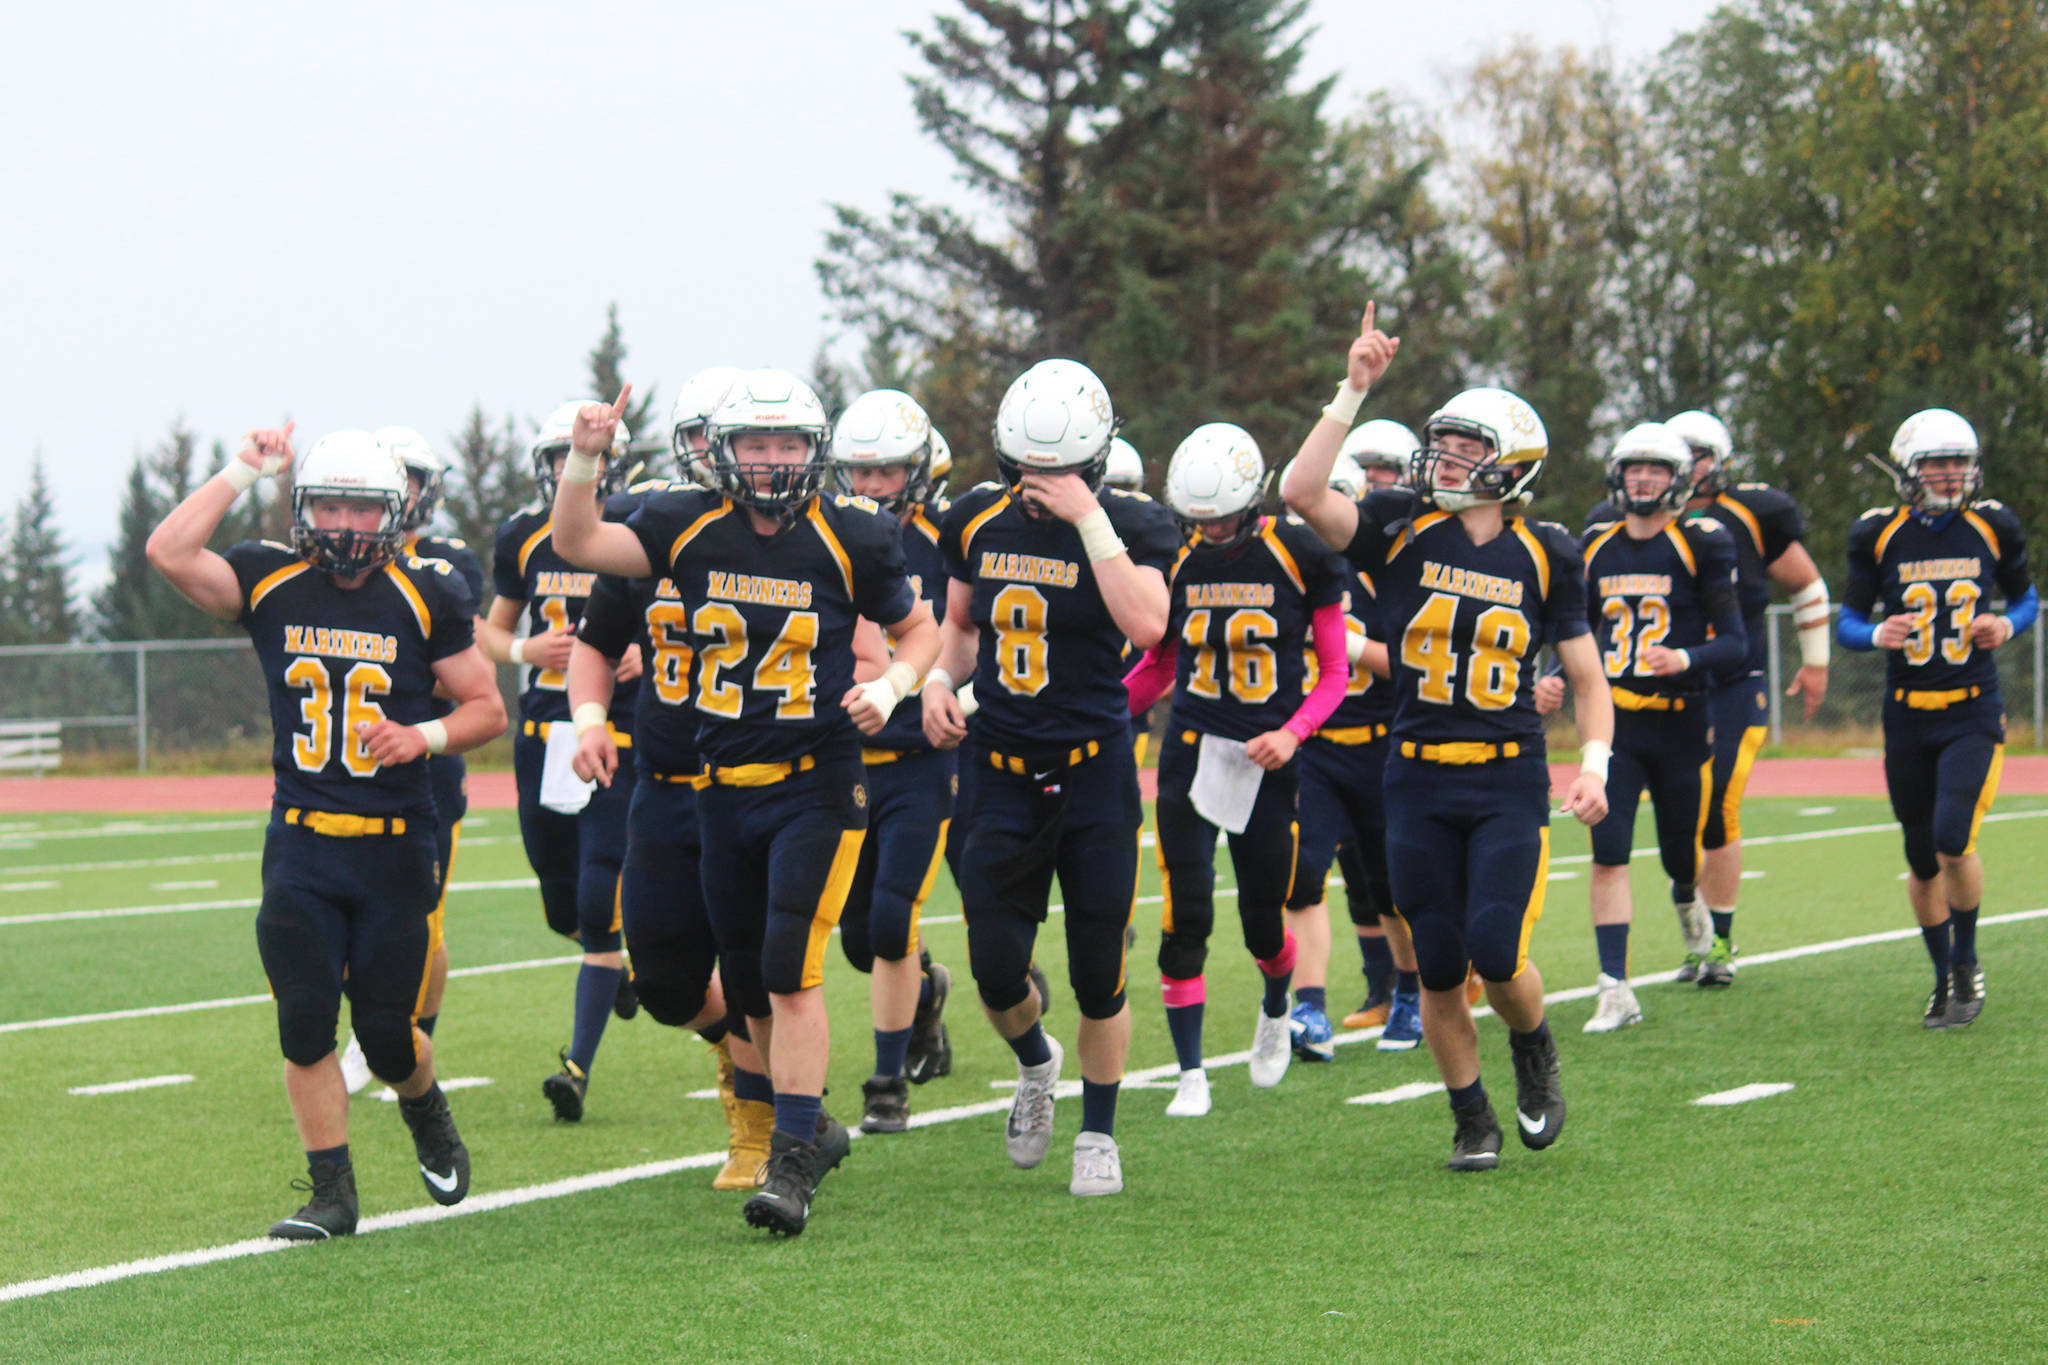 Players on the Homer Mariners varsity football team leave the field celebrating after their win against Nikiski High School in a homecoming game Saturday, Sept. 16, 2017 at Homer High School in Homer, Alaska. The Mariners topped the Bulldogs 38-0. (Photo by Megan Pacer/Homer News)